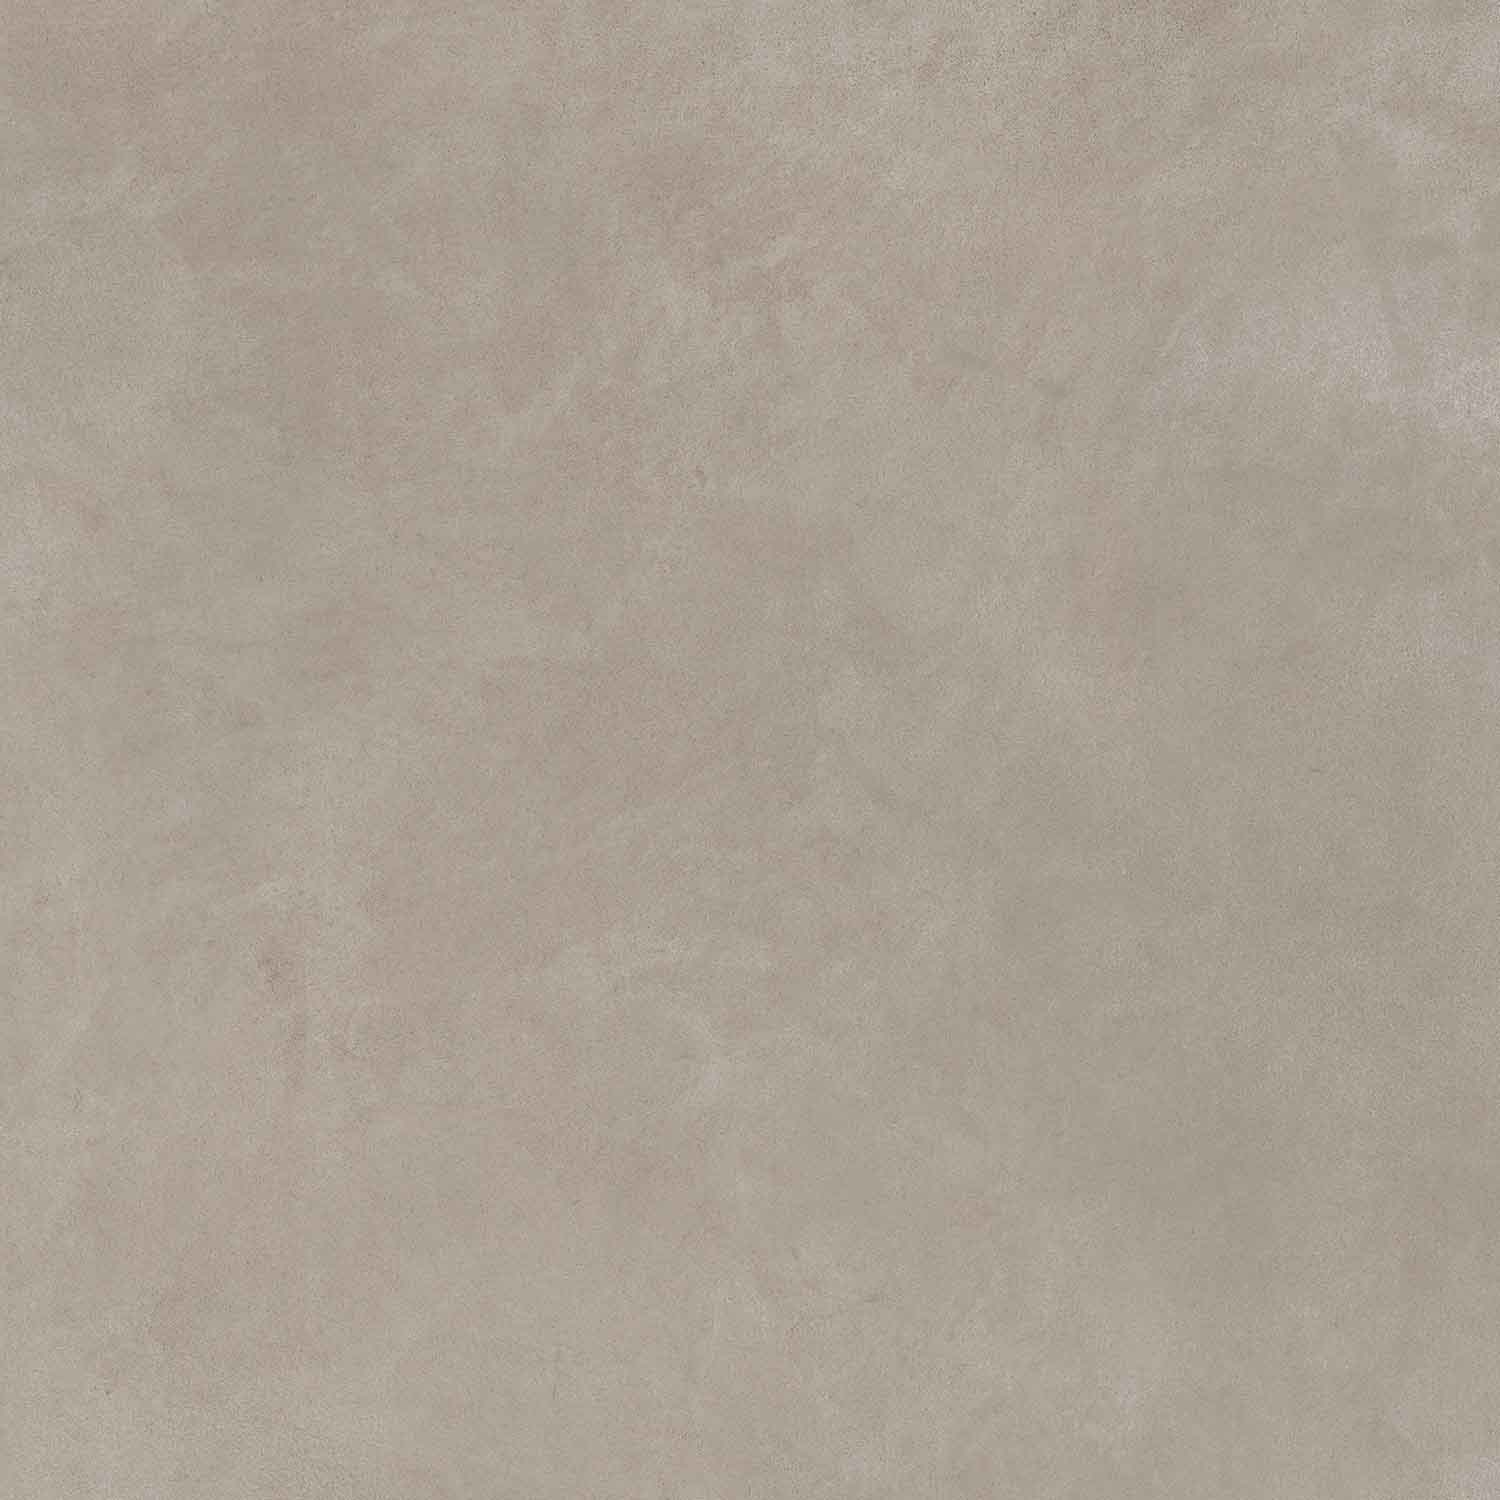 Buildtech 2.0 CE Mud Slate-hammered 10mm 60 x 60